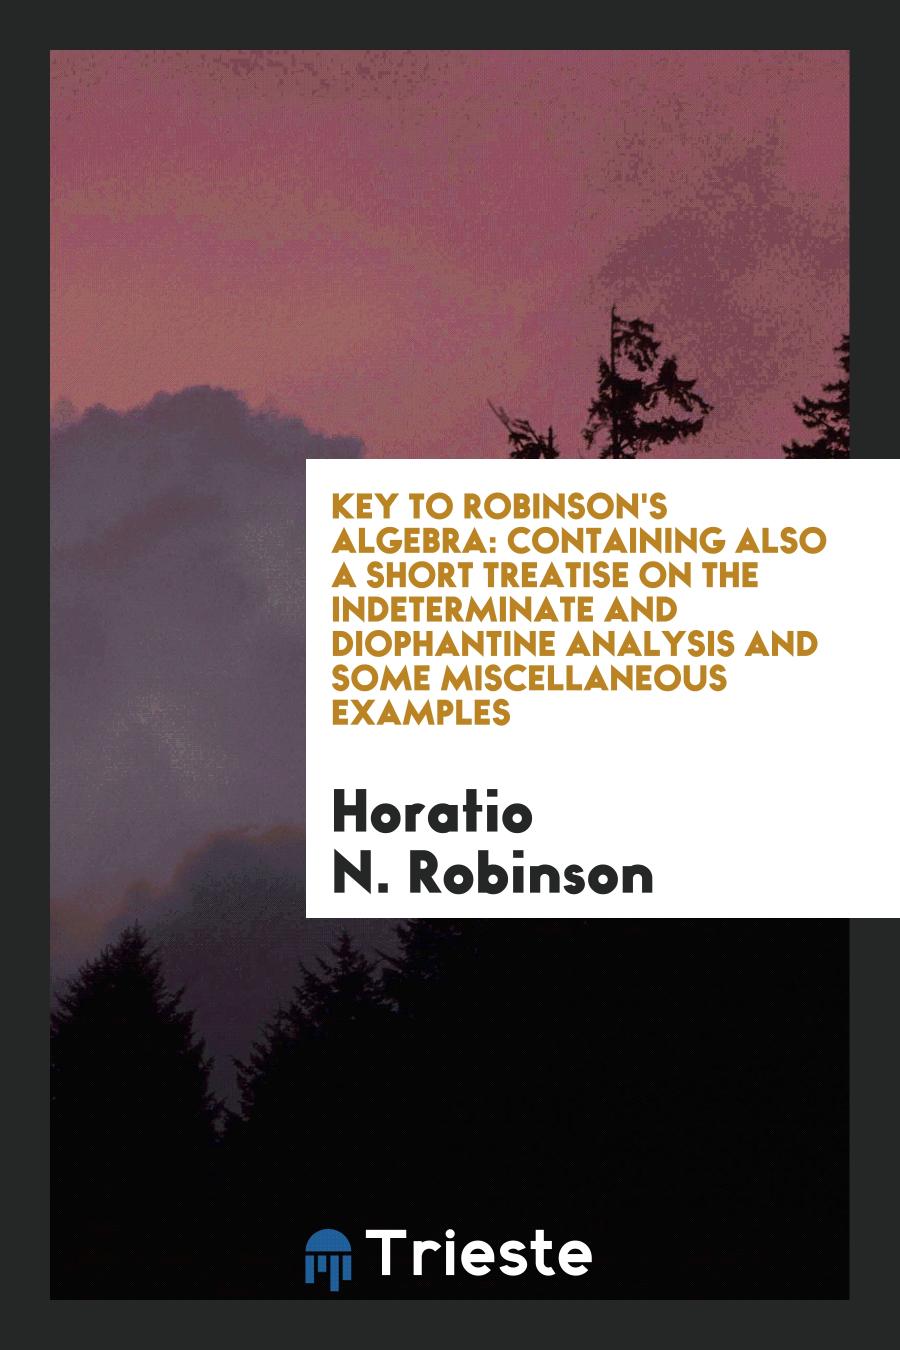 Key to Robinson's Algebra: Containing Also a Short Treatise on the Indeterminate and Diophantine Analysis and Some Miscellaneous Examples